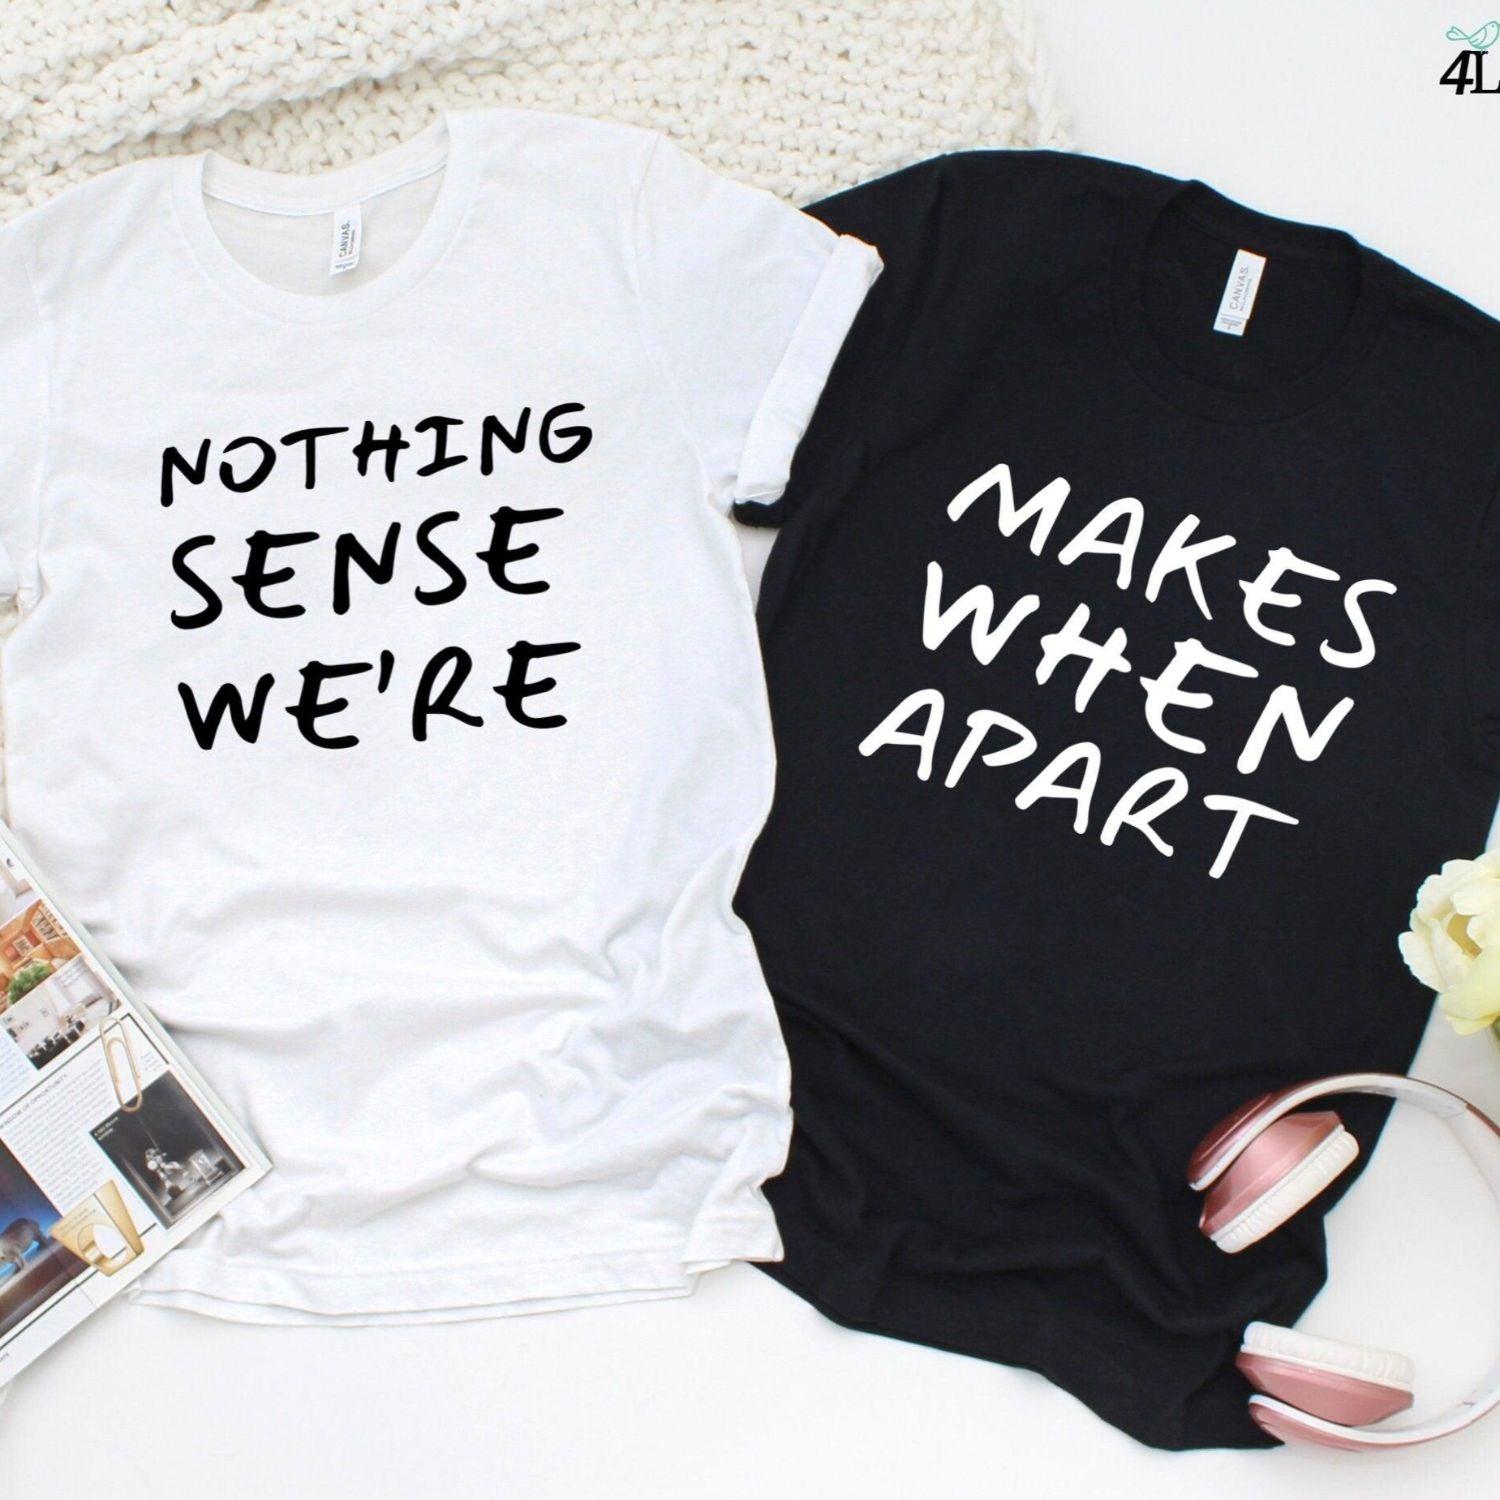 Matching Set: Love Makes No Sense When Apart - Perfect Valentines Gift for Couples! - 4Lovebirds